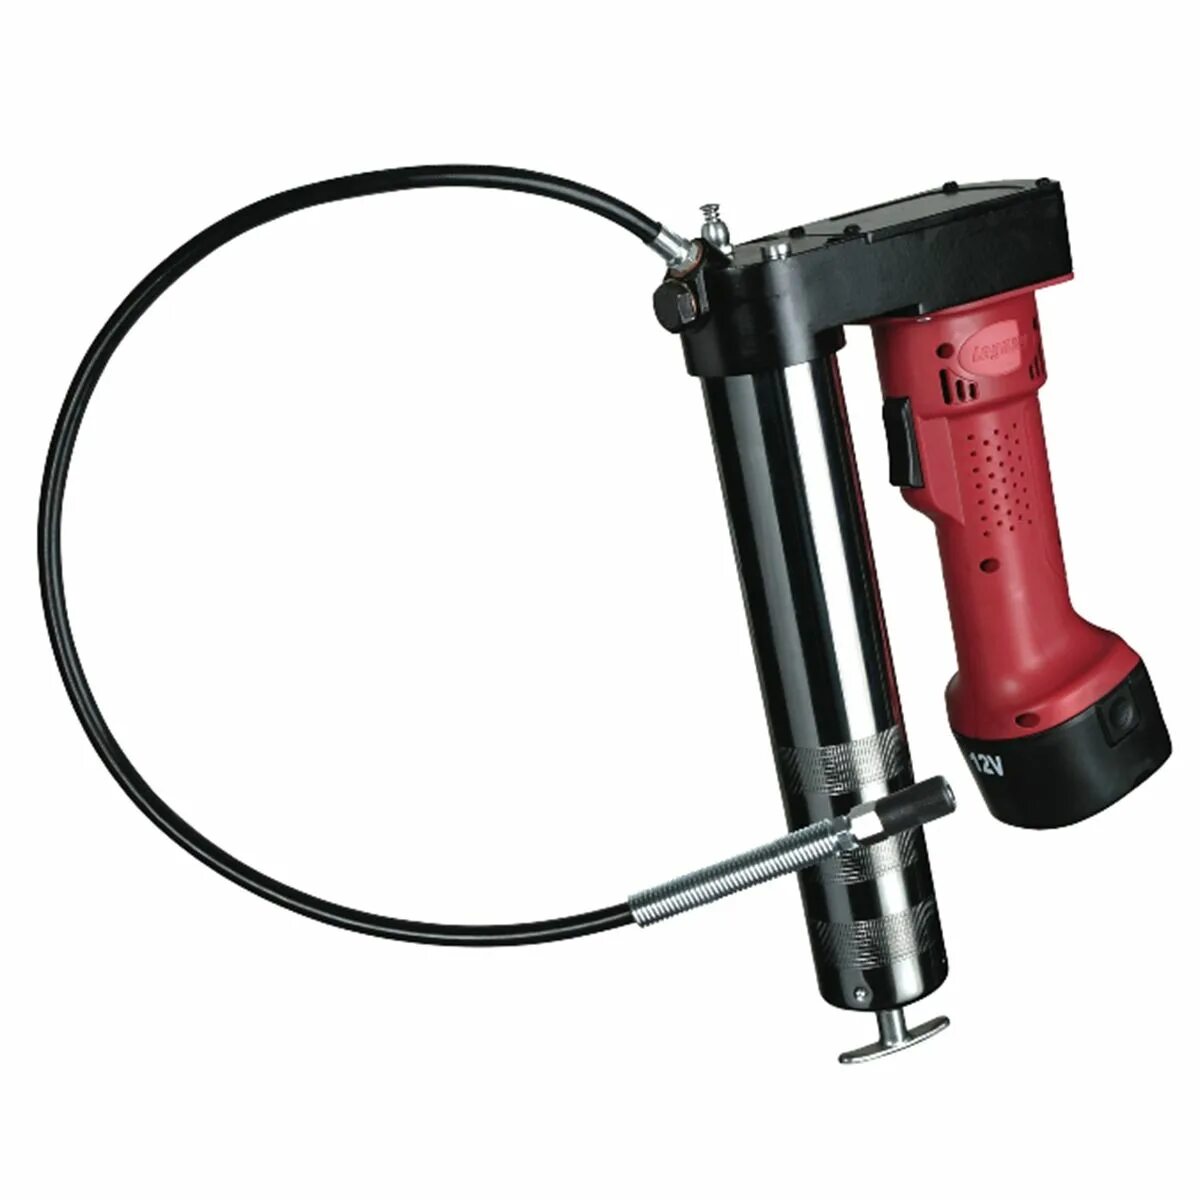 Battery operated. Battery Powered Grease Gun. Pat no m338308 шприц для смазки Cordless Grease Gun. Cordless Grease Gun,. Grease Gun Manitowoc.